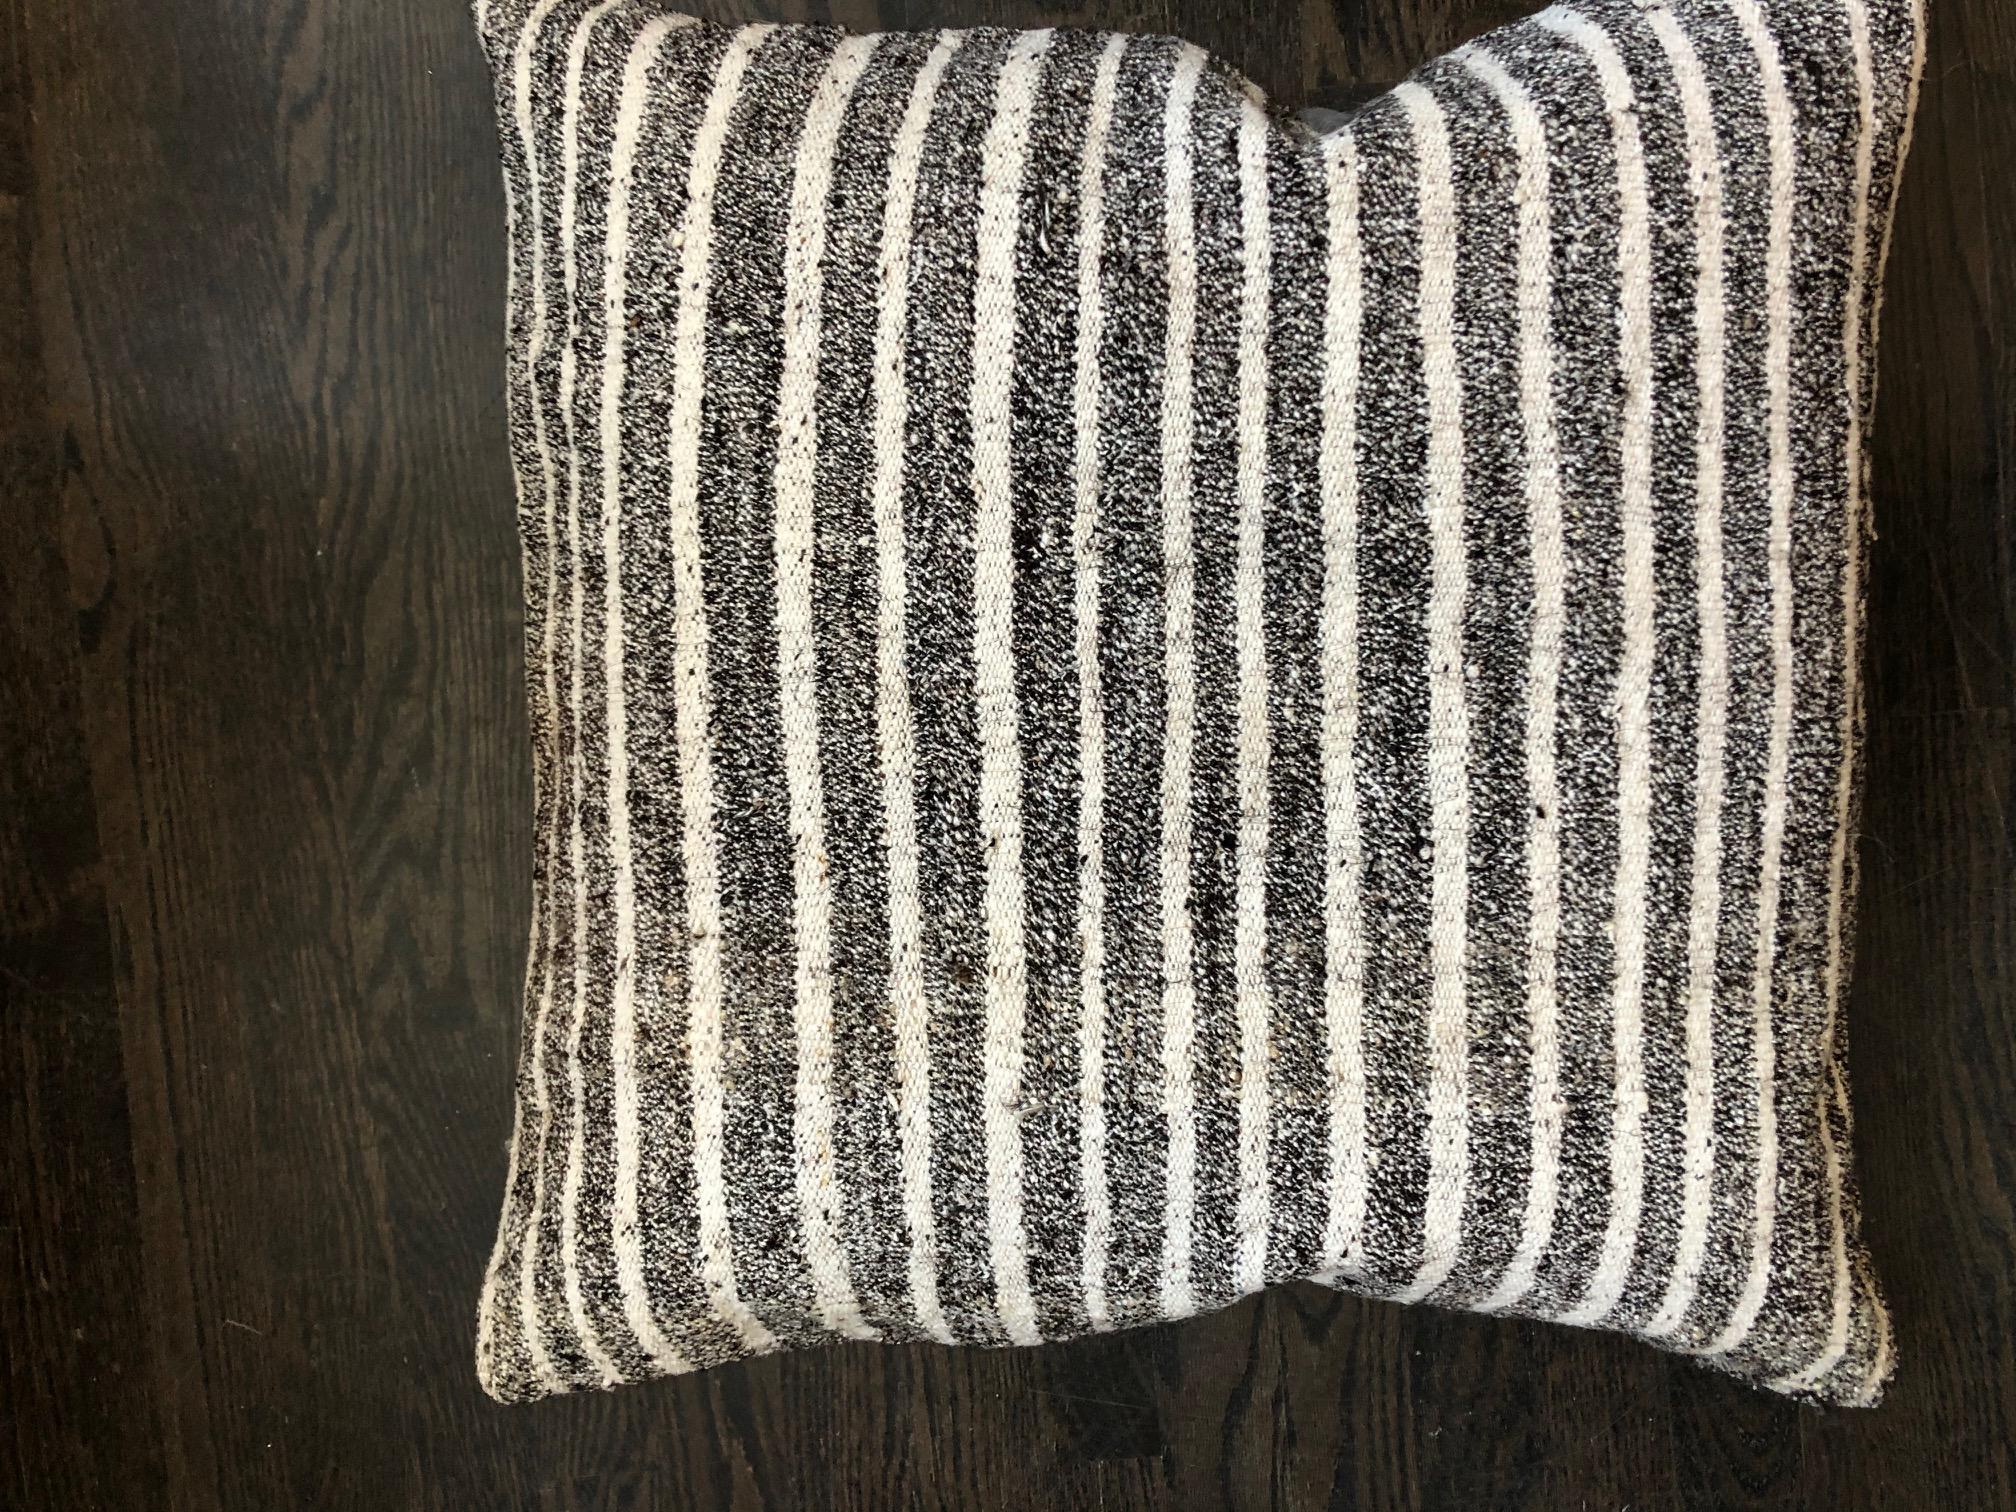 Black and white striped wool pillow by Le Lampade

Square striped hand knotted wool pillow.
Pillow insert is feather and has a concealed zipper. 100% natural fabric made in Italy.